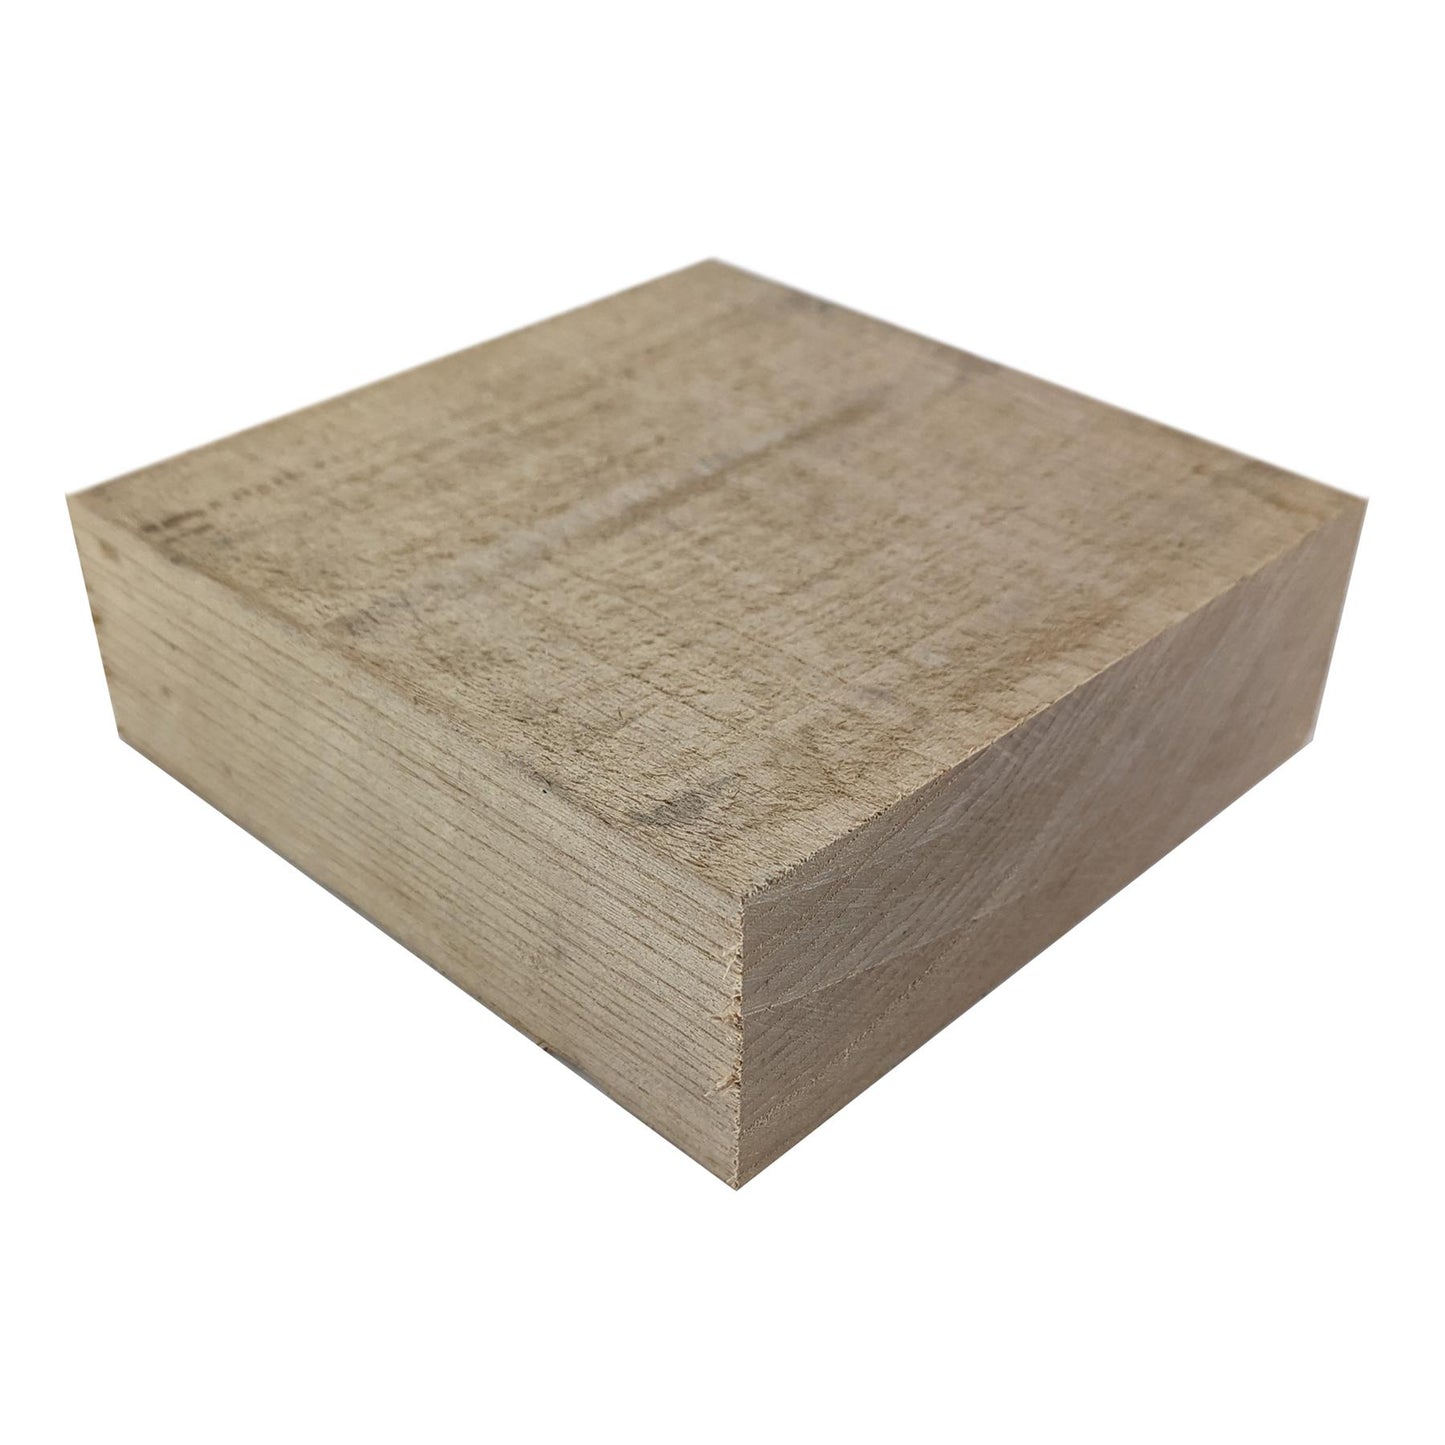 [Turners' Mill] American White Ash Carving Block - 150x150x50mm